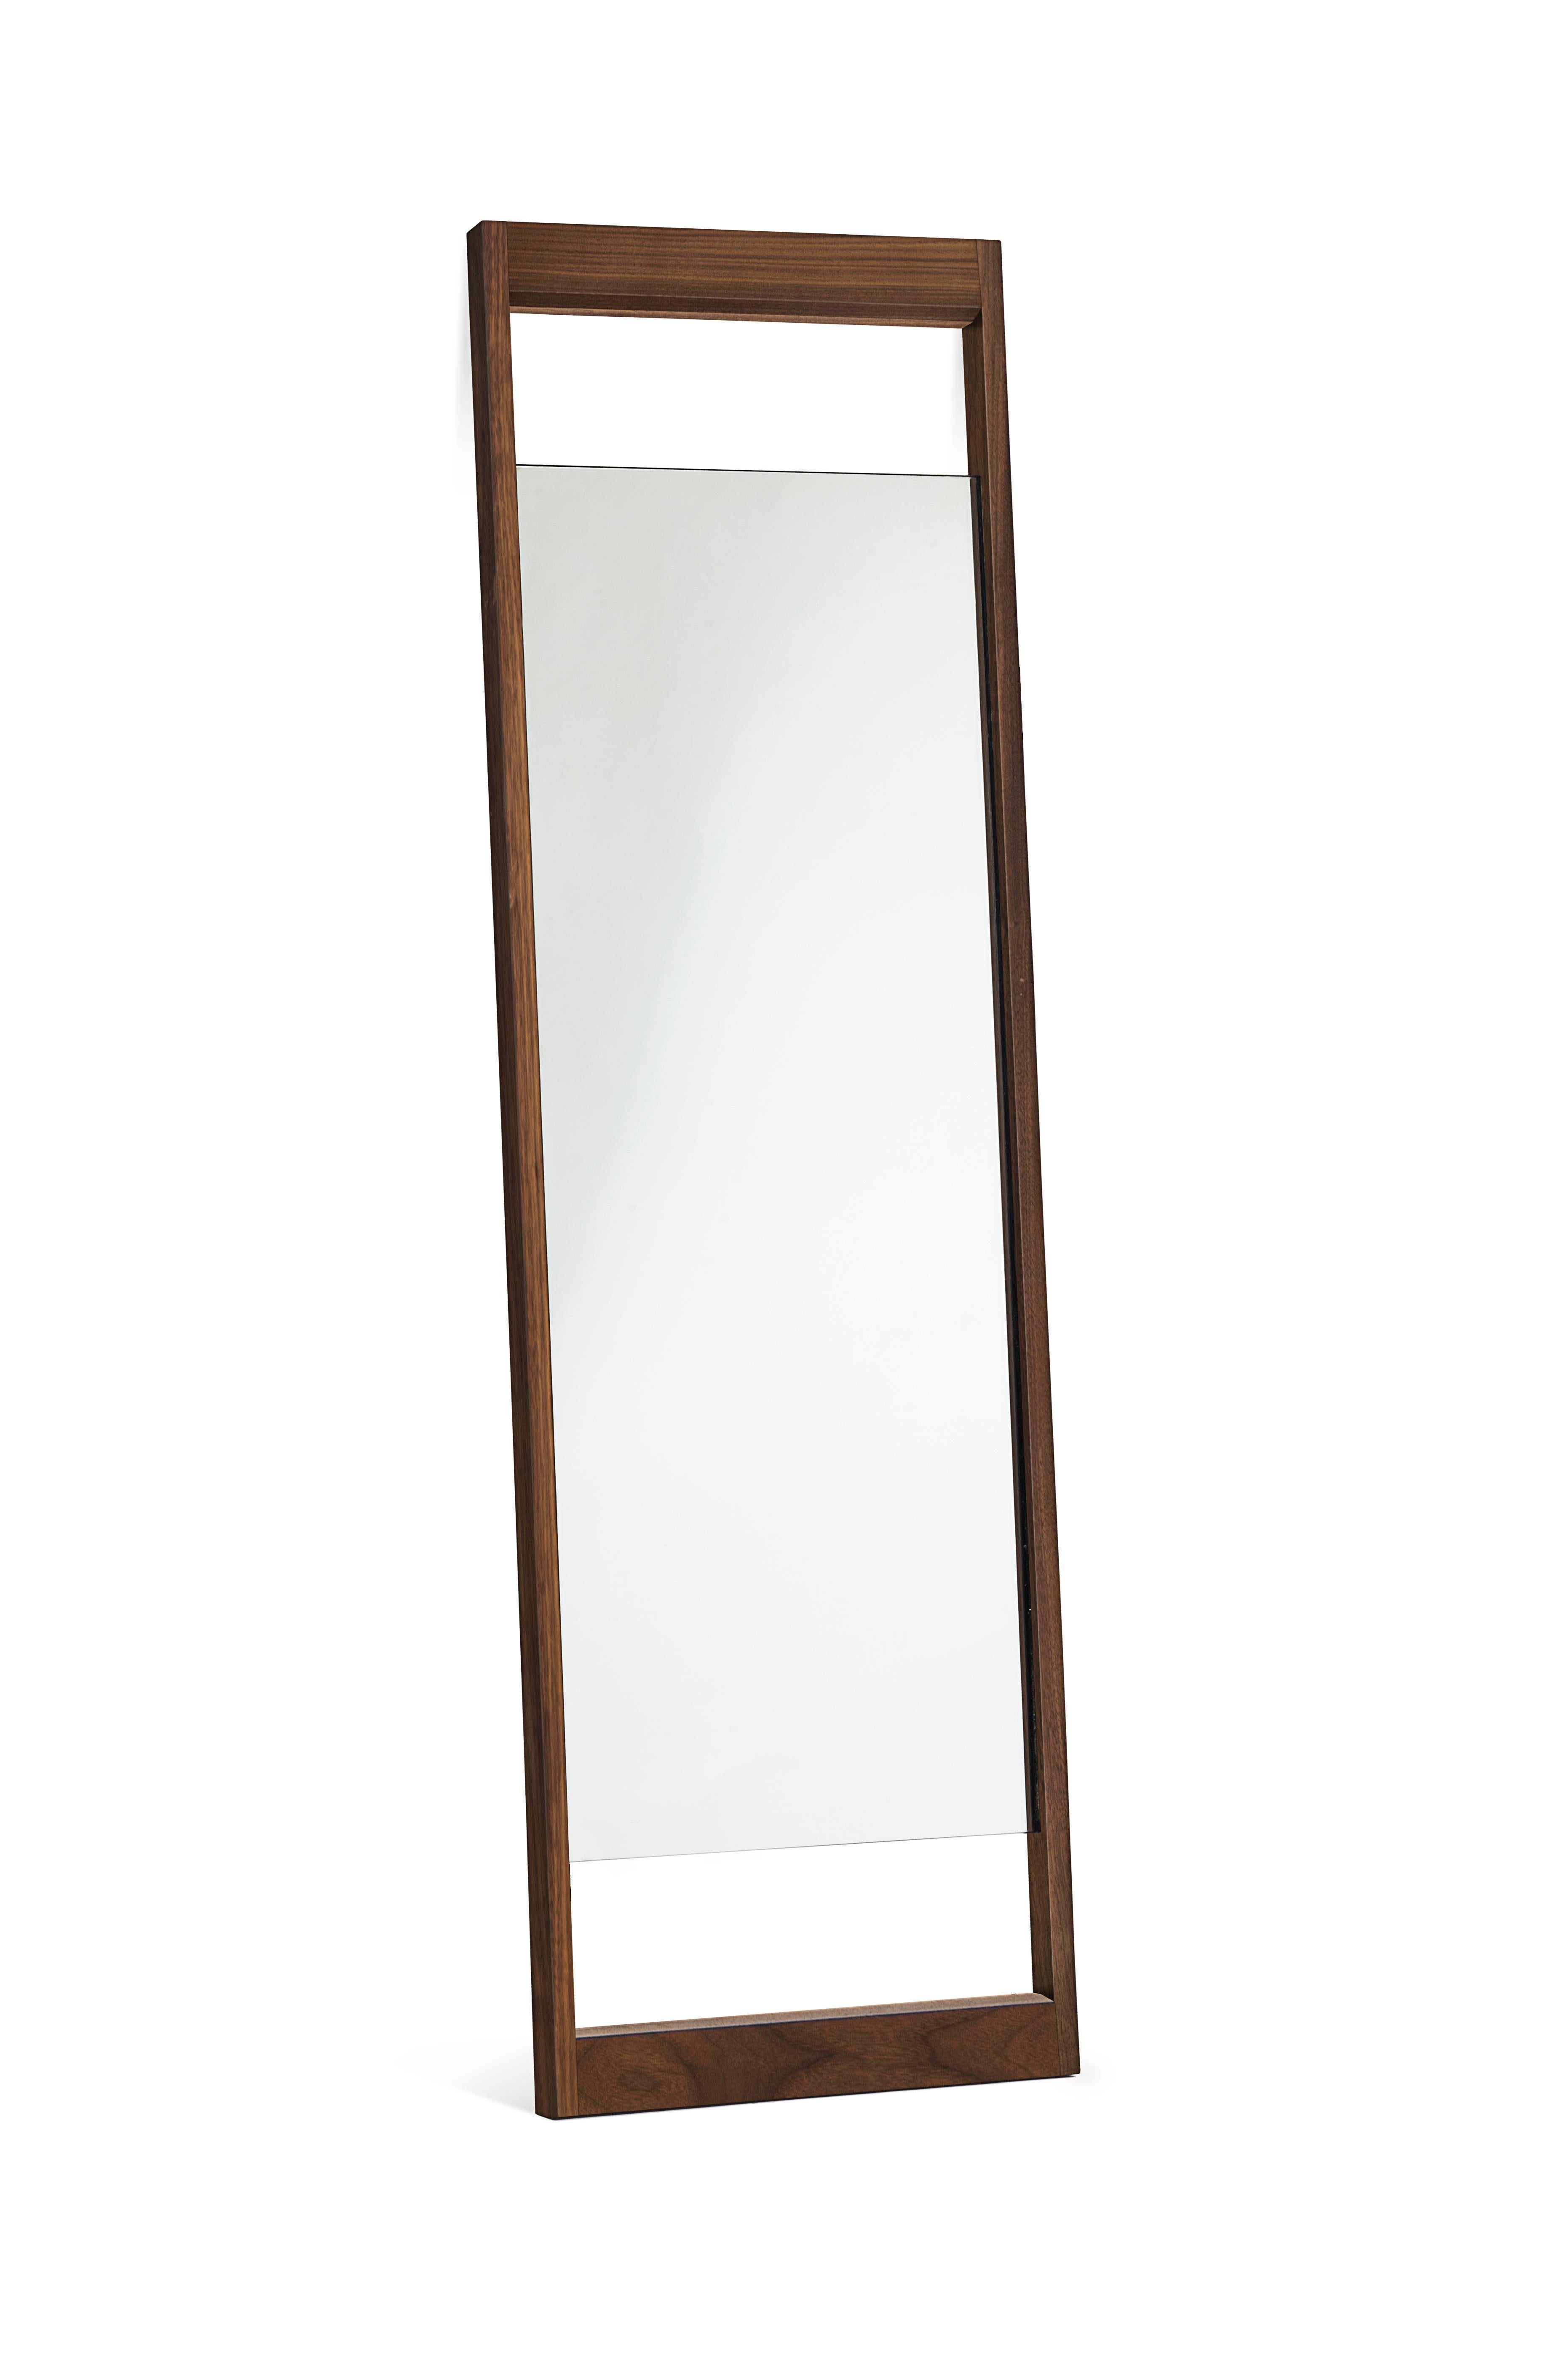 Hand-Crafted Mirror DEDO, Mexican Contemporary Design by Emiliano Molina for CUCHARA For Sale